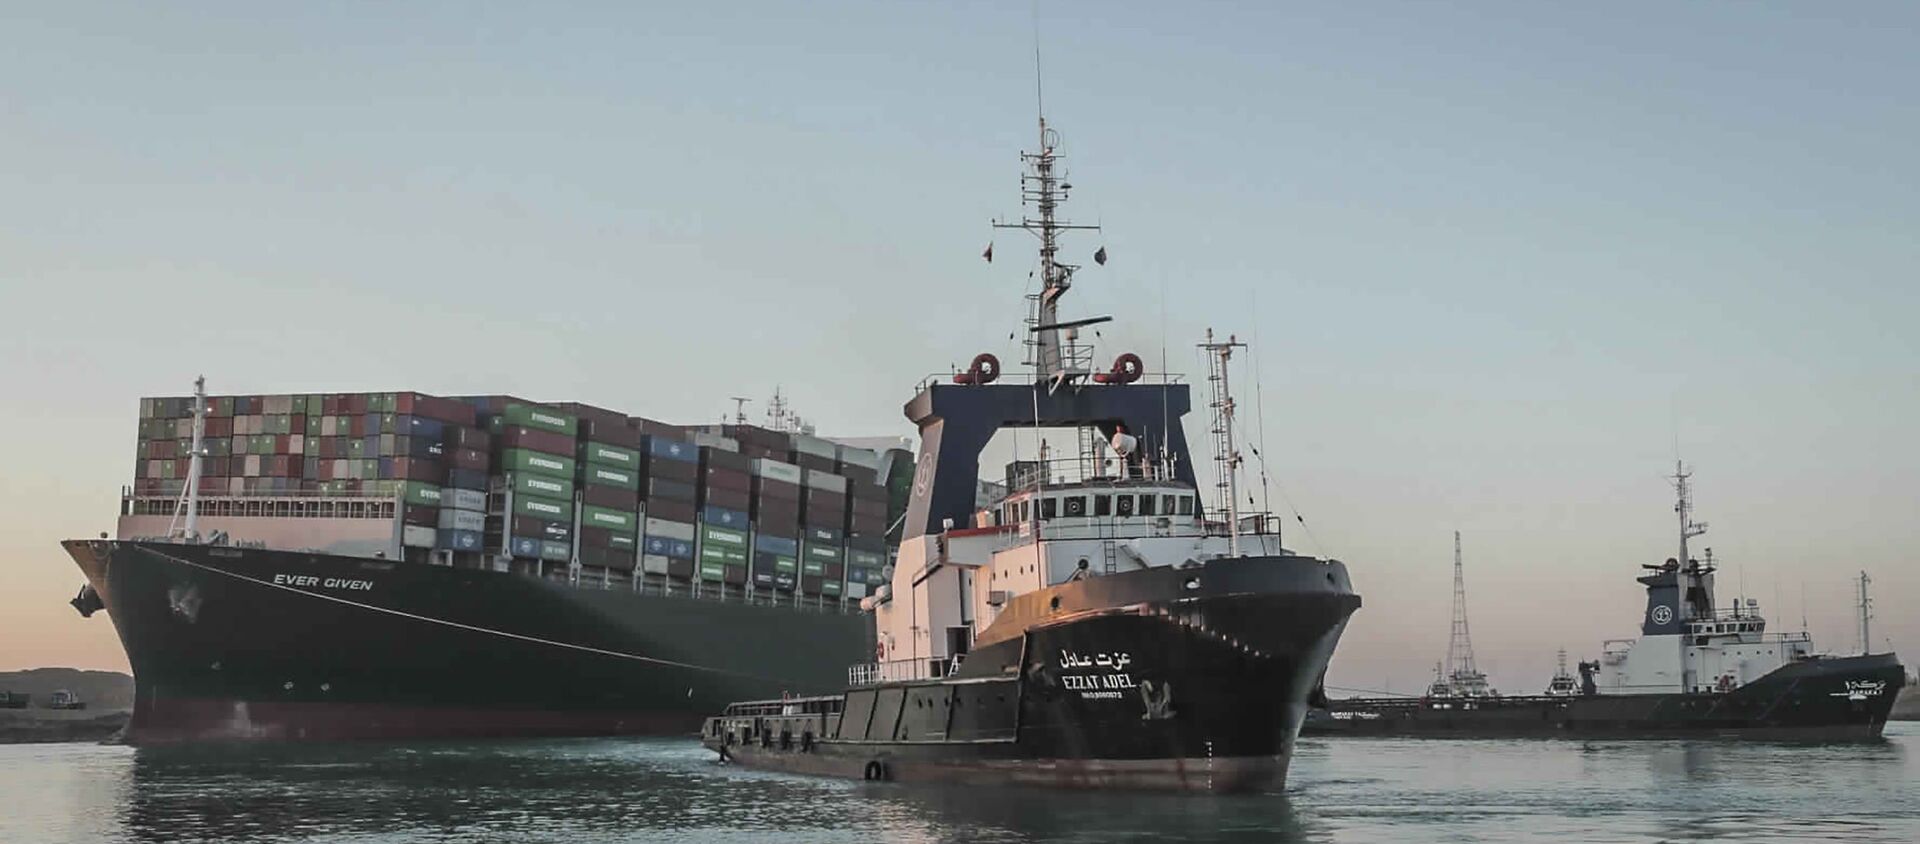 In this photo released by Suez Canal Authority, the Ever Given, a Panama-flagged cargo ship is pulled by one of the Suez Canal tugboats, in the Suez Canal, Egypt, Monday, March 29, 2021 - Sputnik International, 1920, 04.04.2021